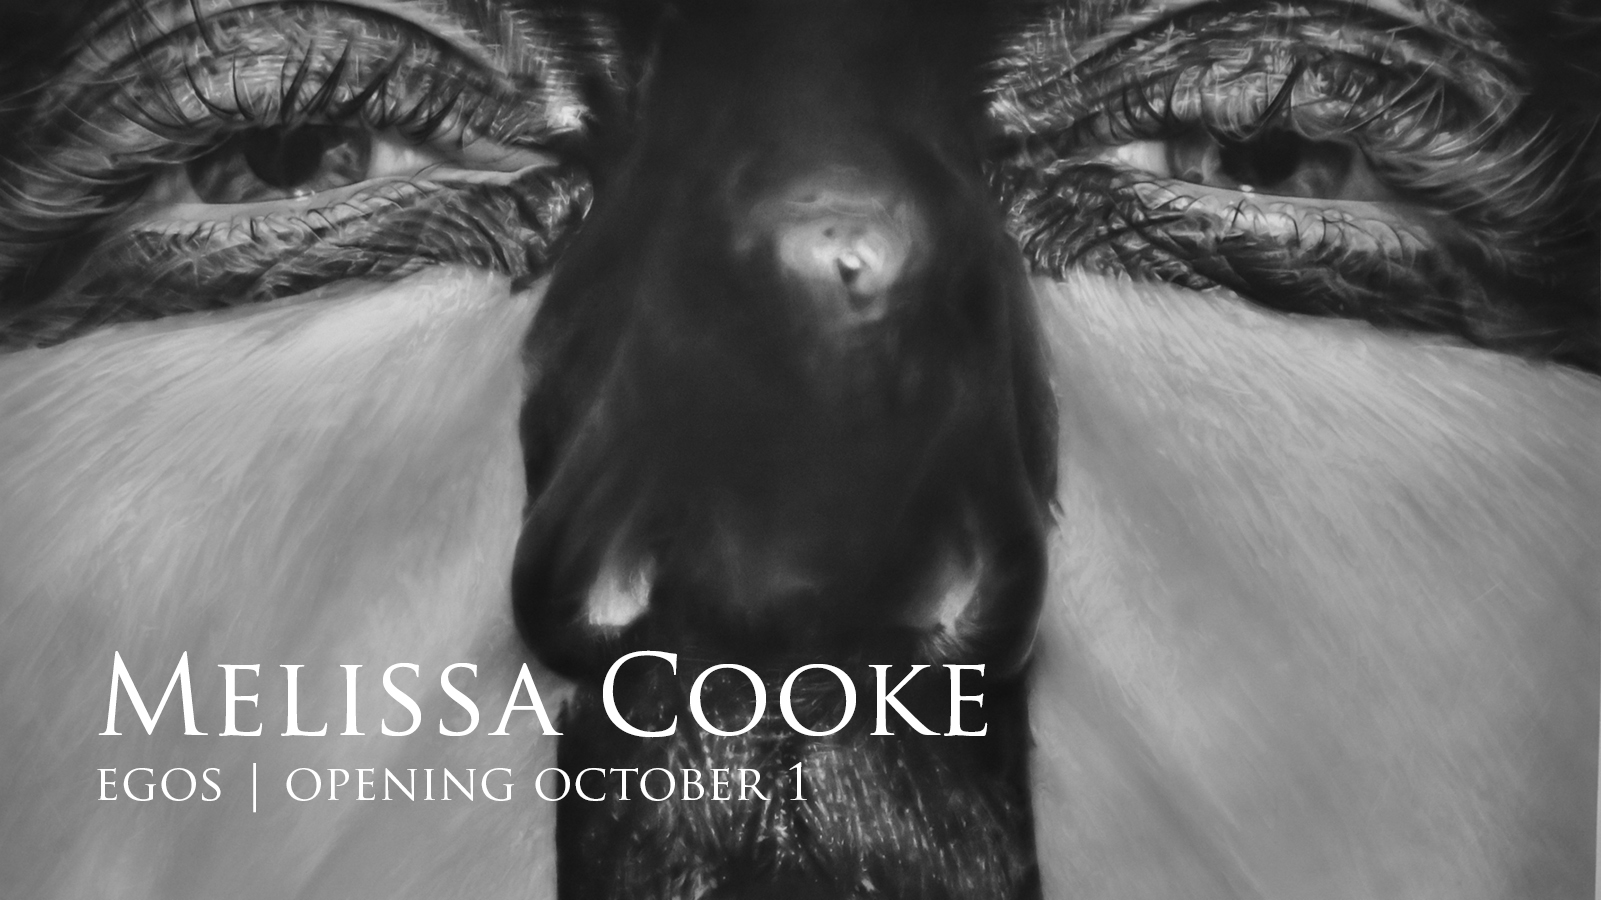 Melissa Cooke’s Large-Scale Photorealist Graphite Drawings on View  at the Museum of Wisconsin Art